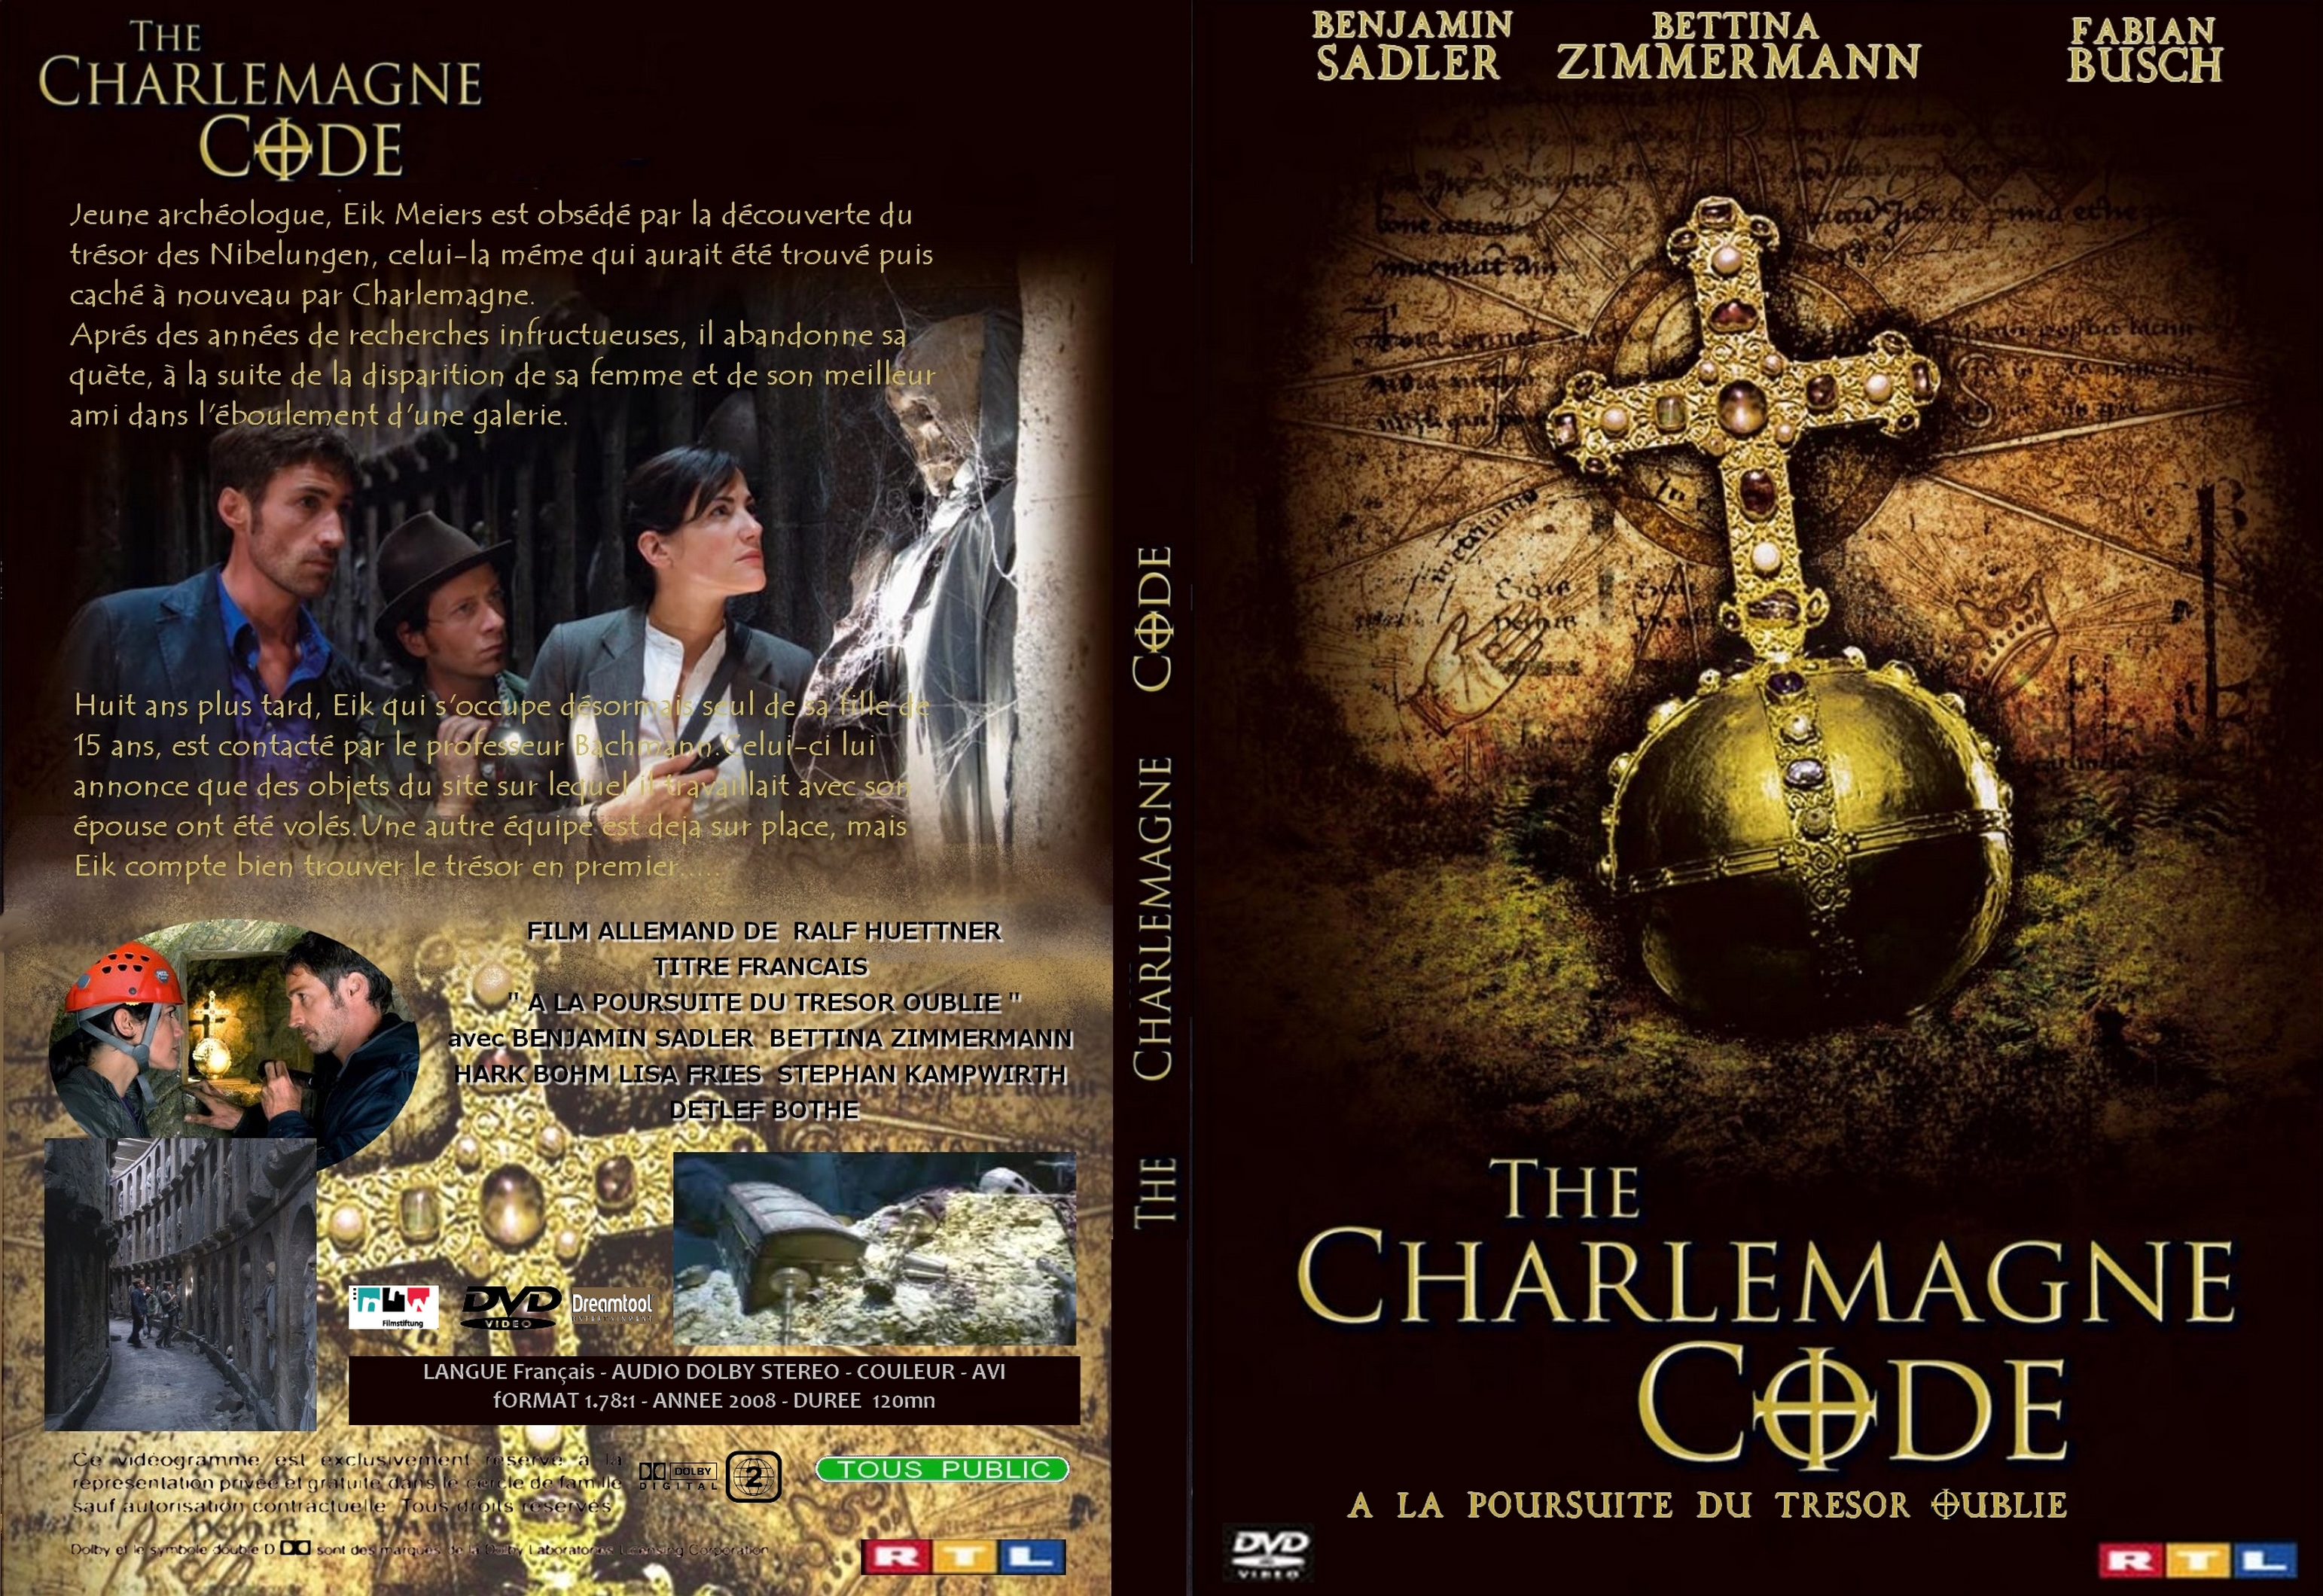 Jaquette DVD The charlemagne code custom